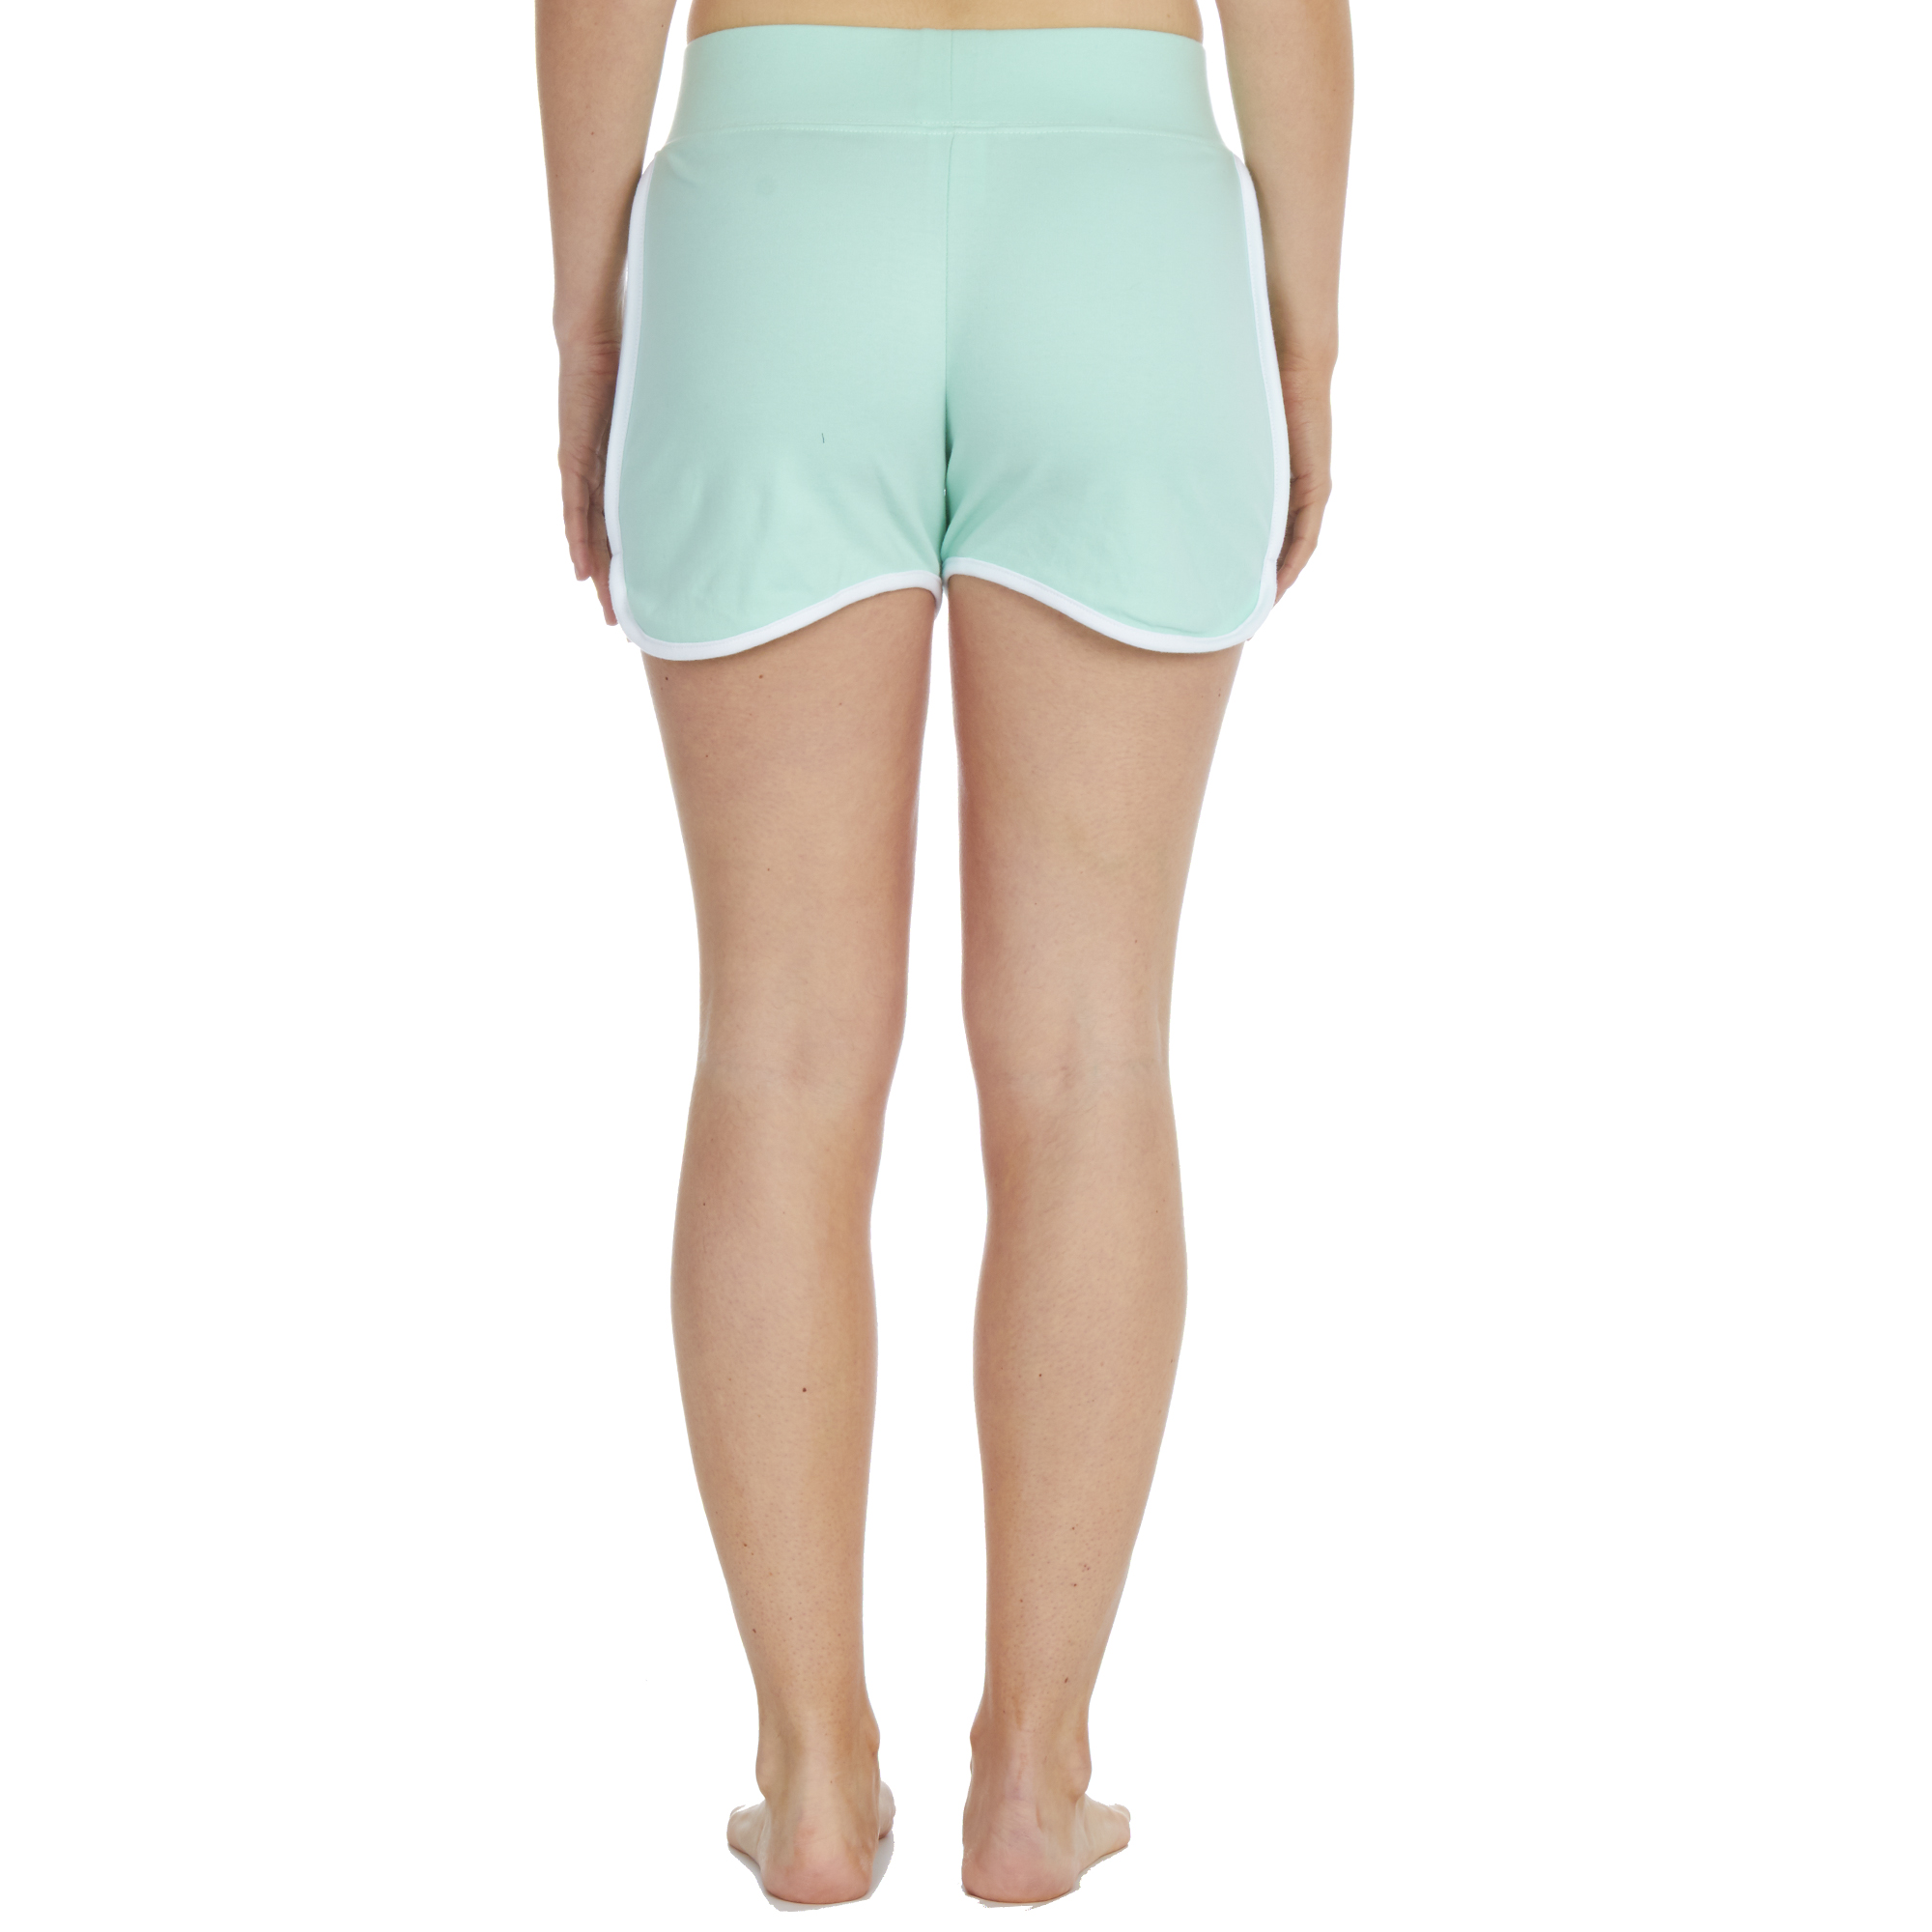 Short pants in mint color/ Summer trousers/ Short pants/ Short trousers